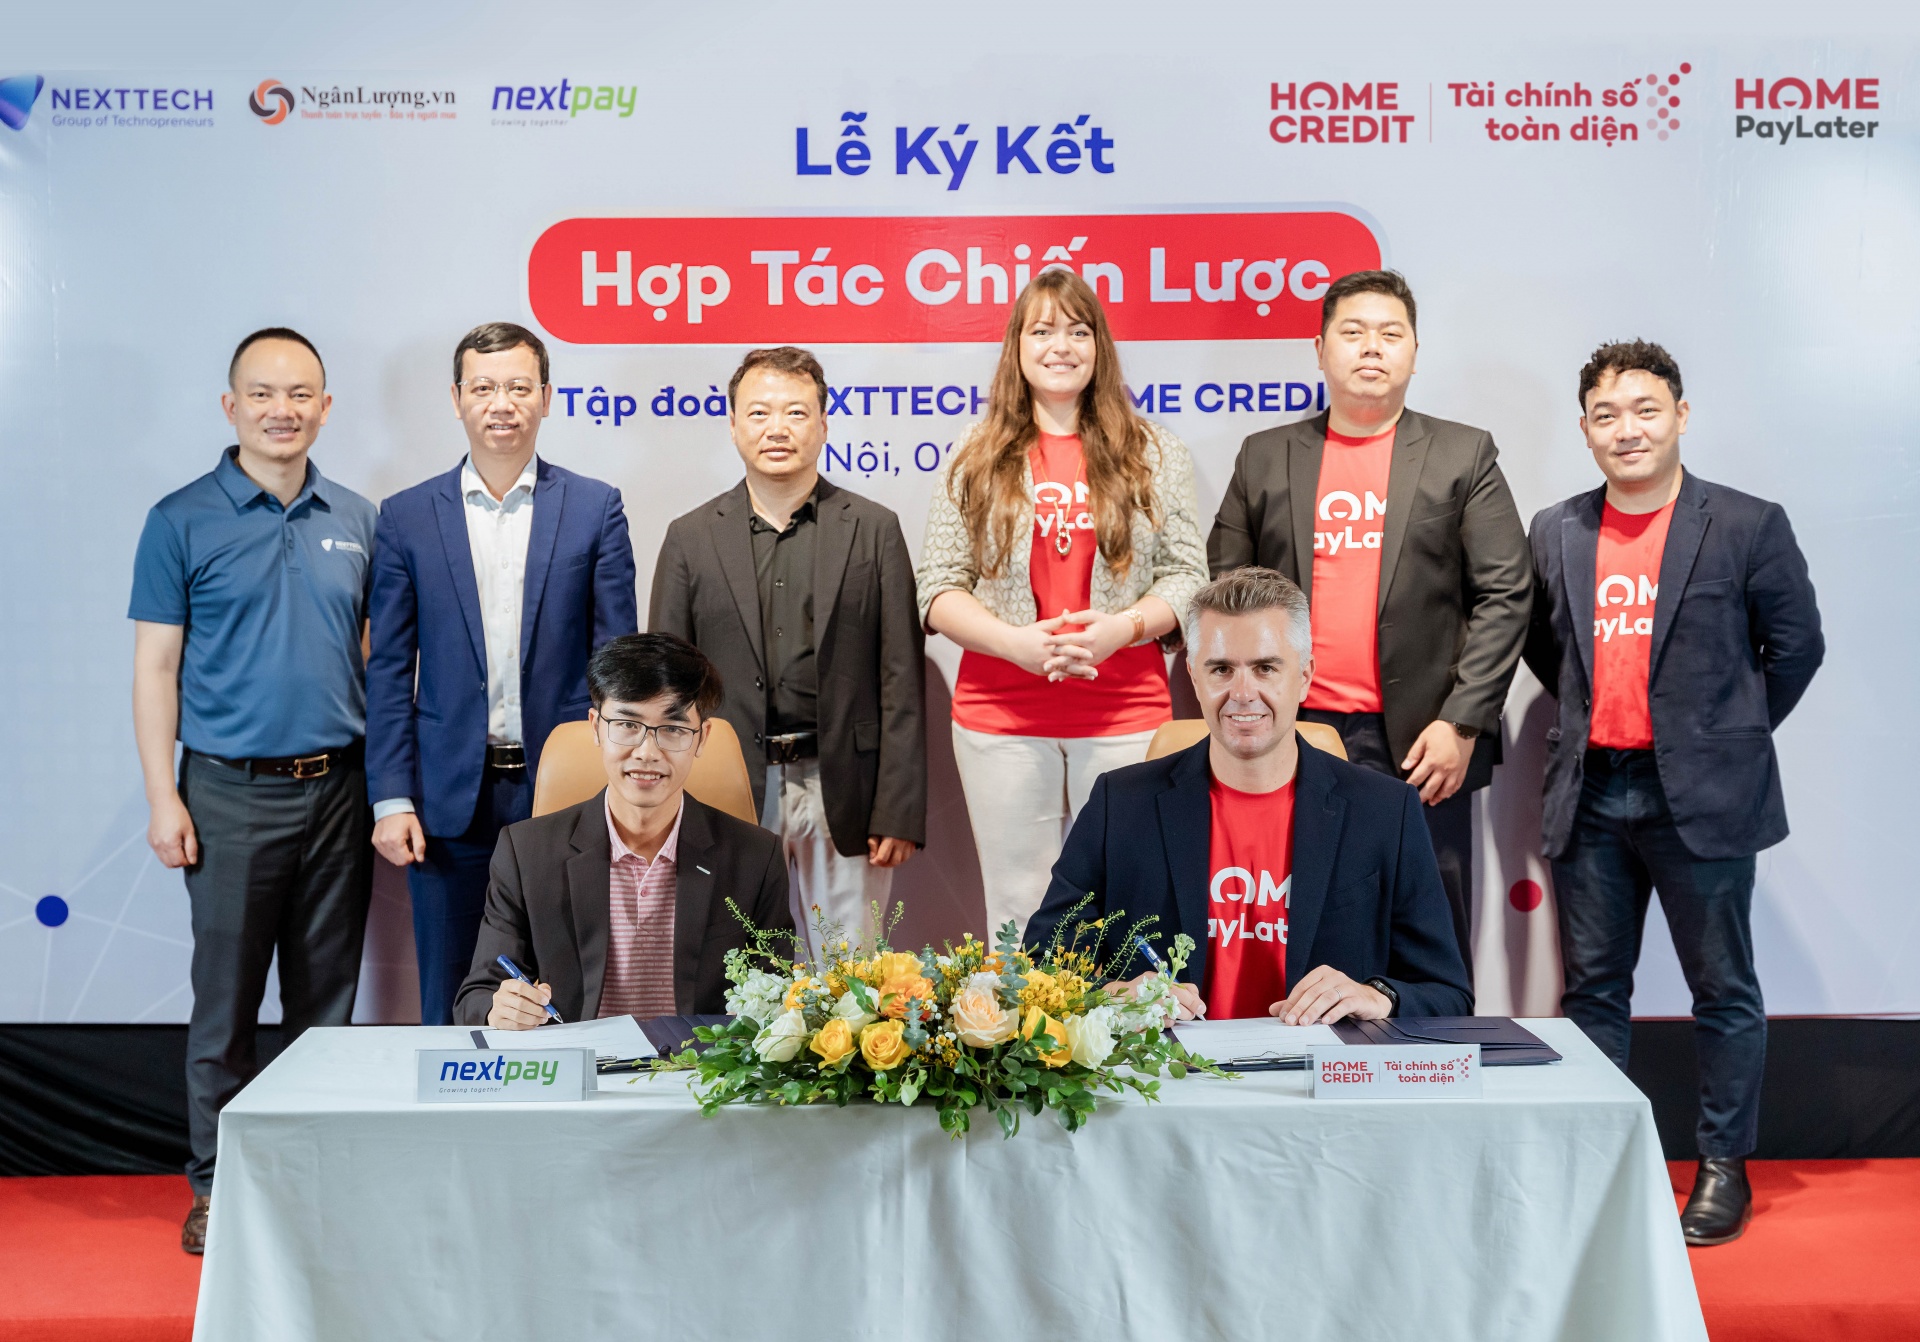 Home Credit and NextTech sign agreement on ‘Buy Now, Pay Later’ project